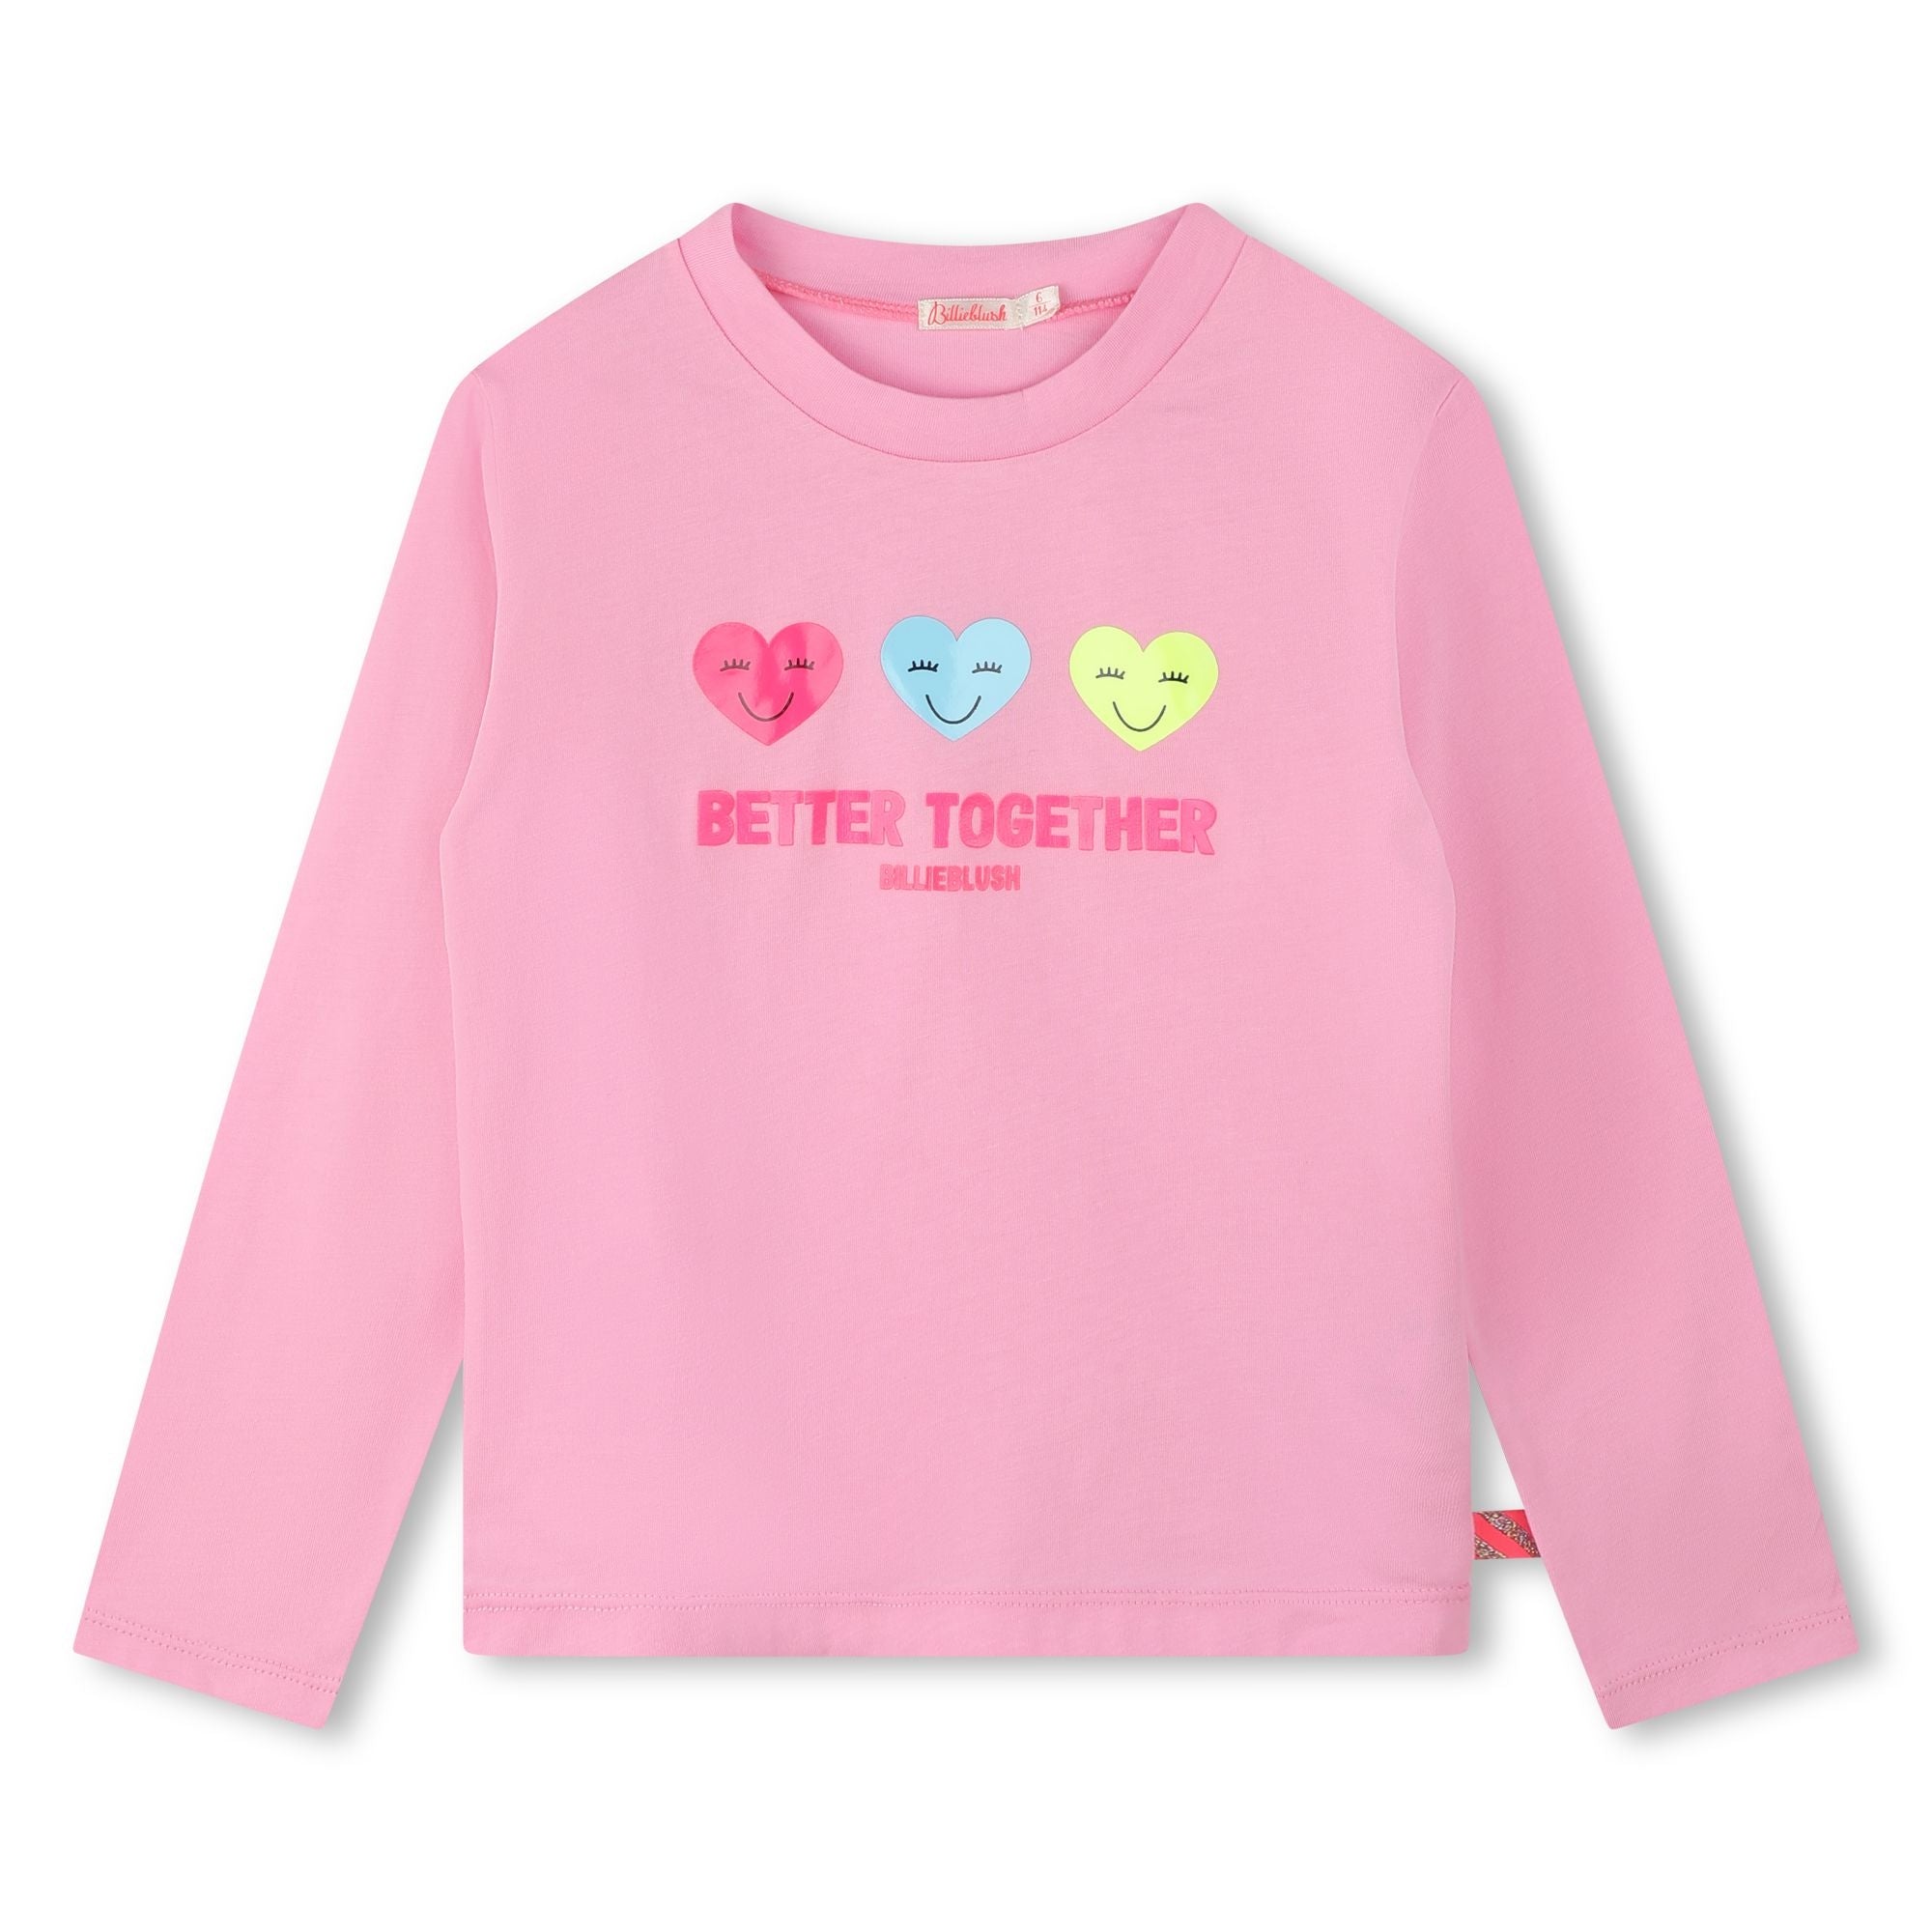 Billieblush - T-shirt Manches Longues "Better Together"